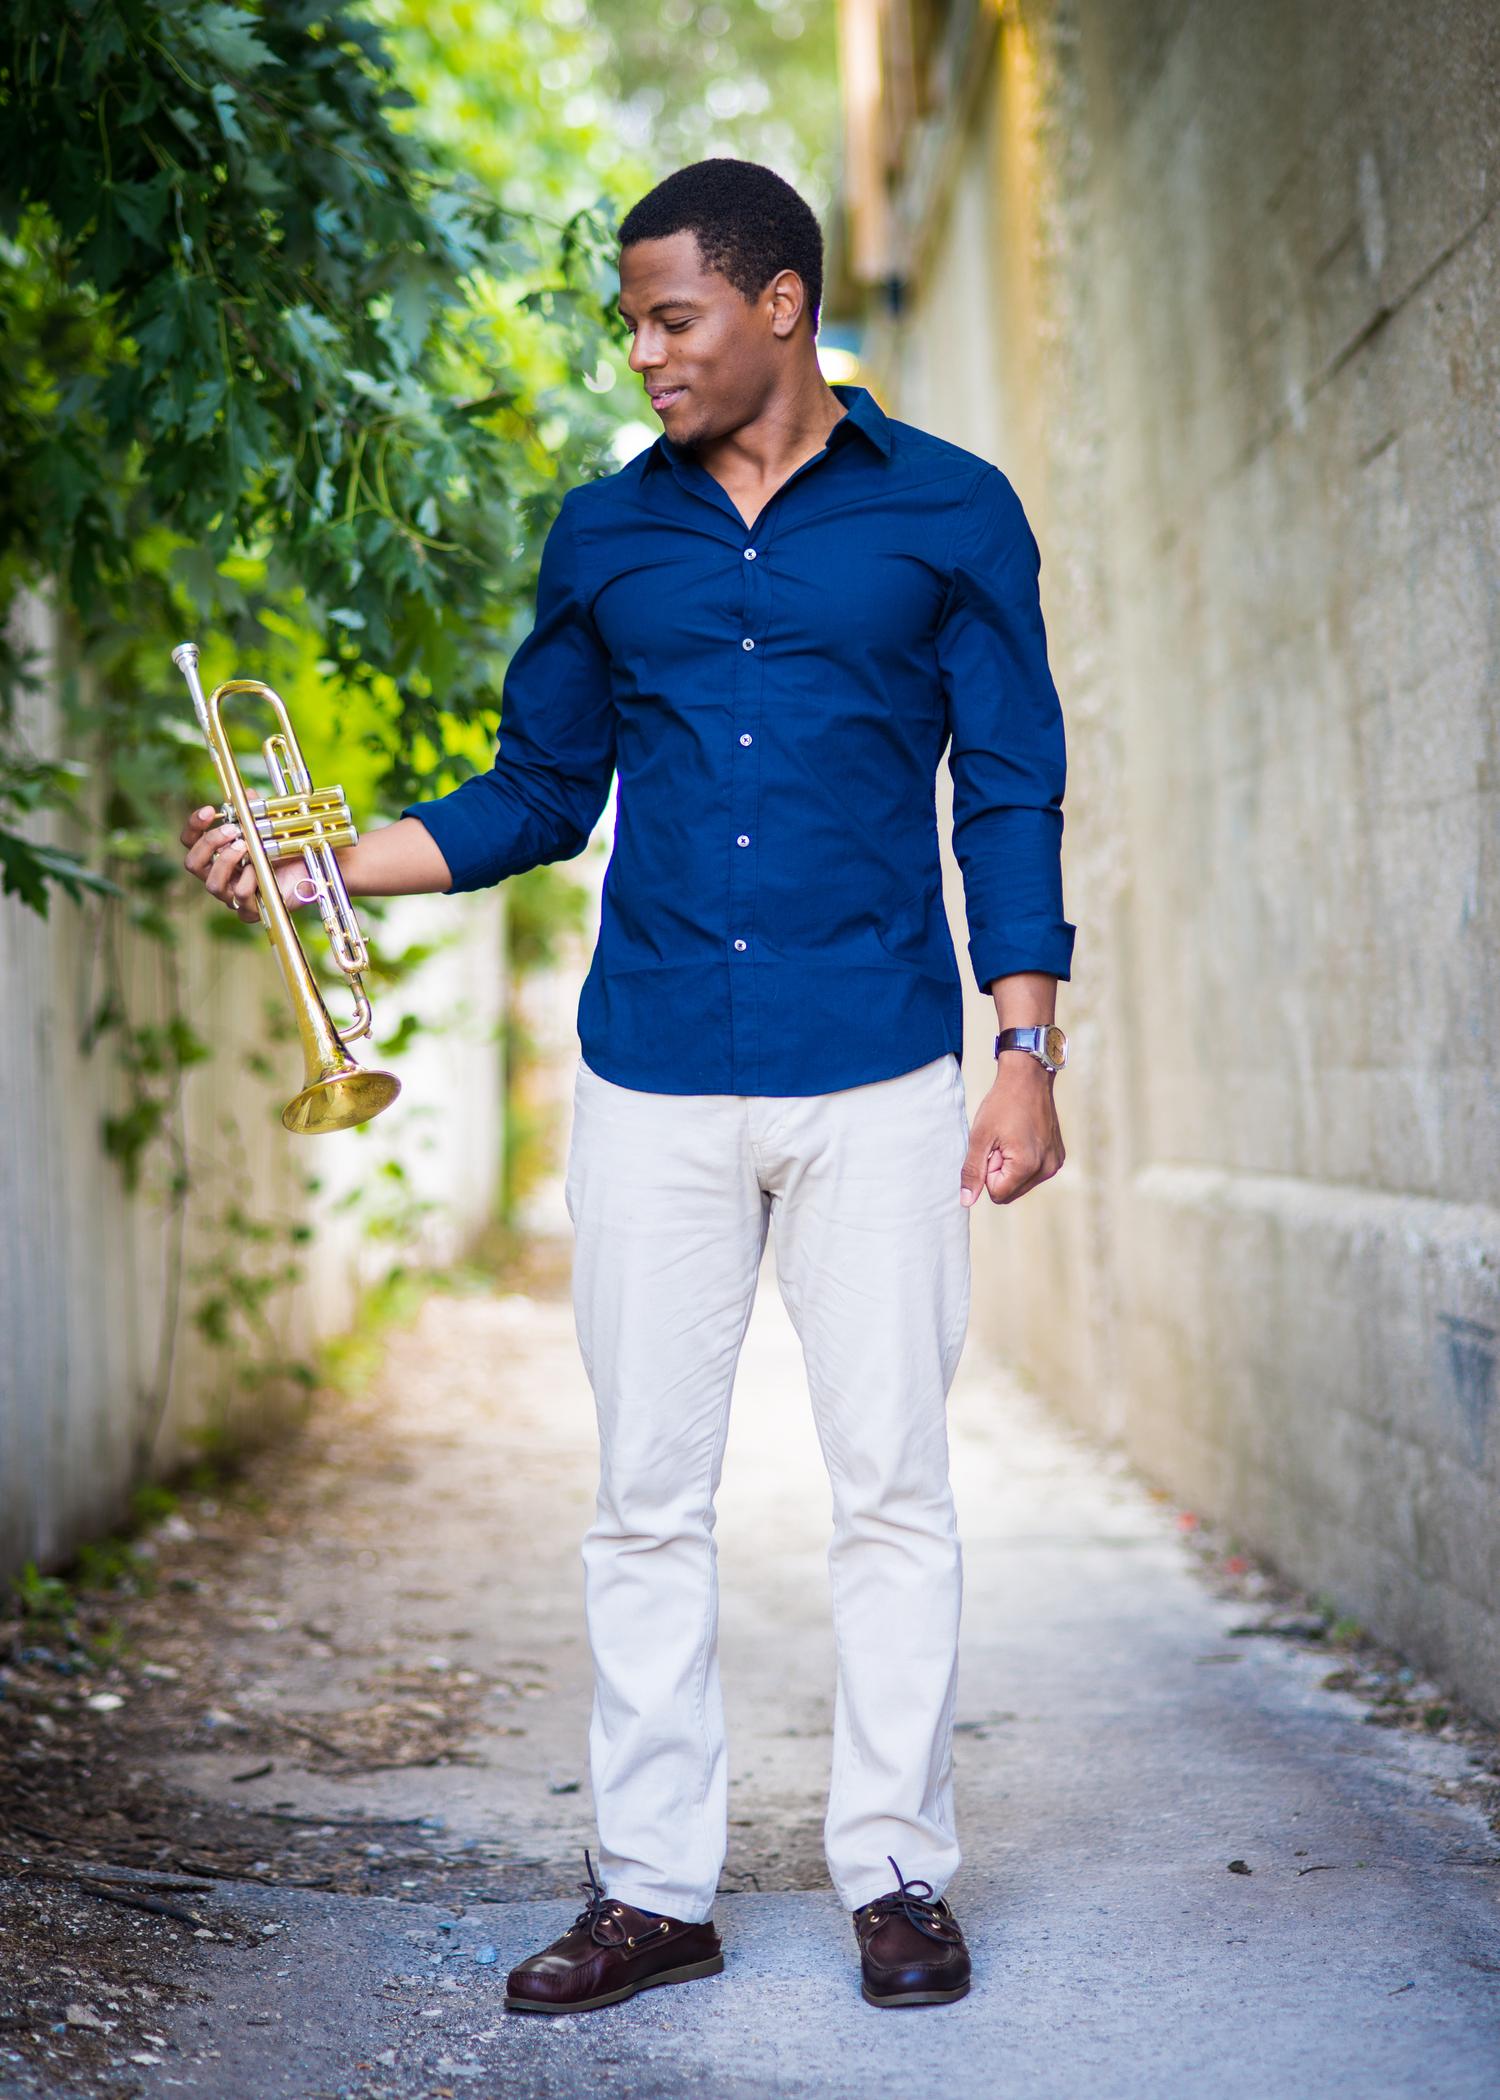 Justin Copeland standing outdoors, smiling at the trumpet in his hand